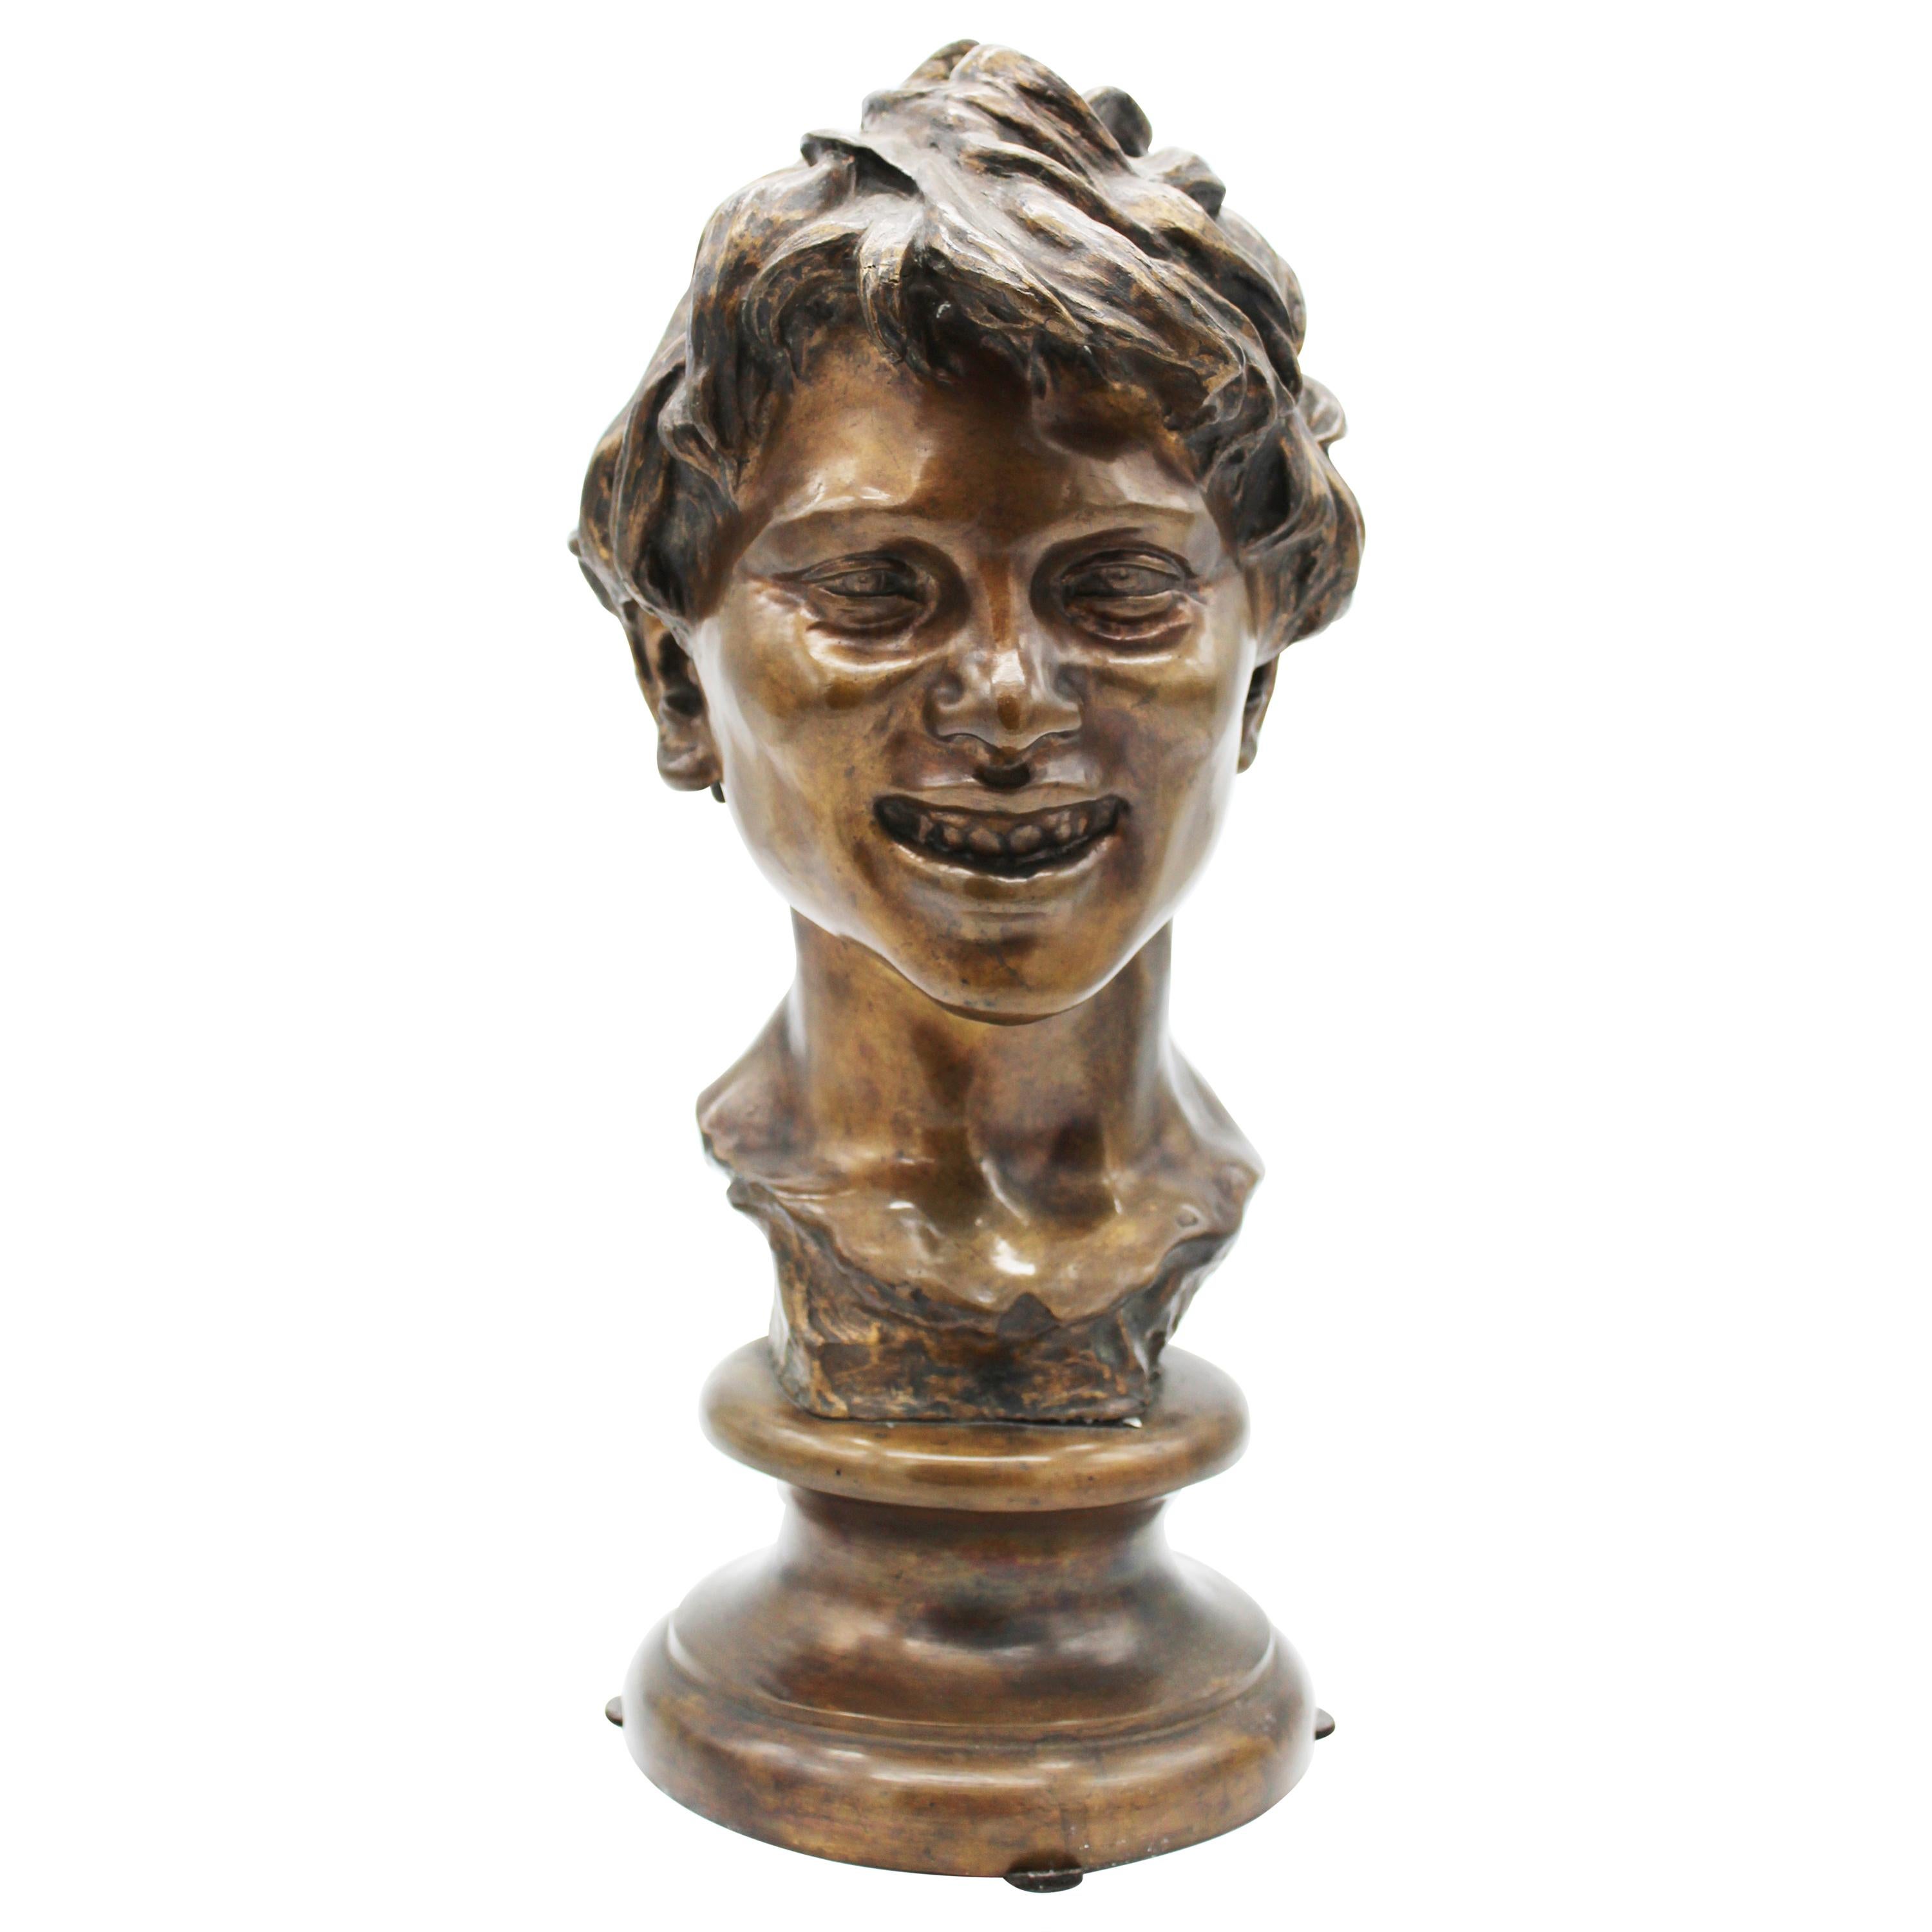 19th Century Italian Bronze Sculpture of Young Boy Signed by Vincenzo Gemito